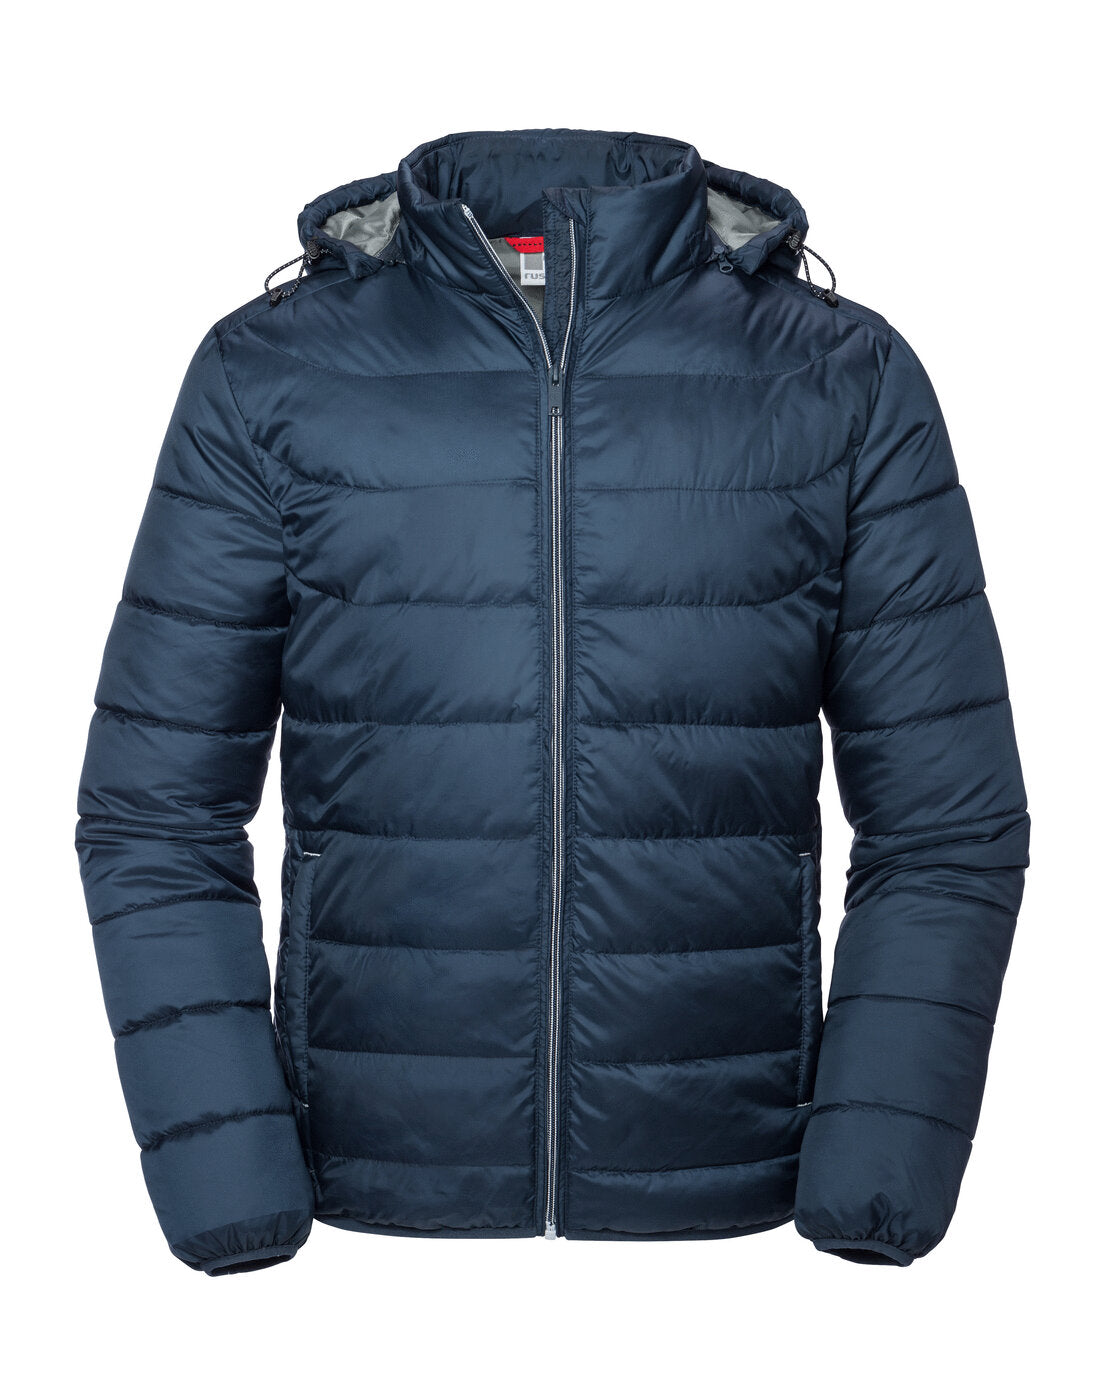 Russell Mens Hooded Nano Jacket French Navy